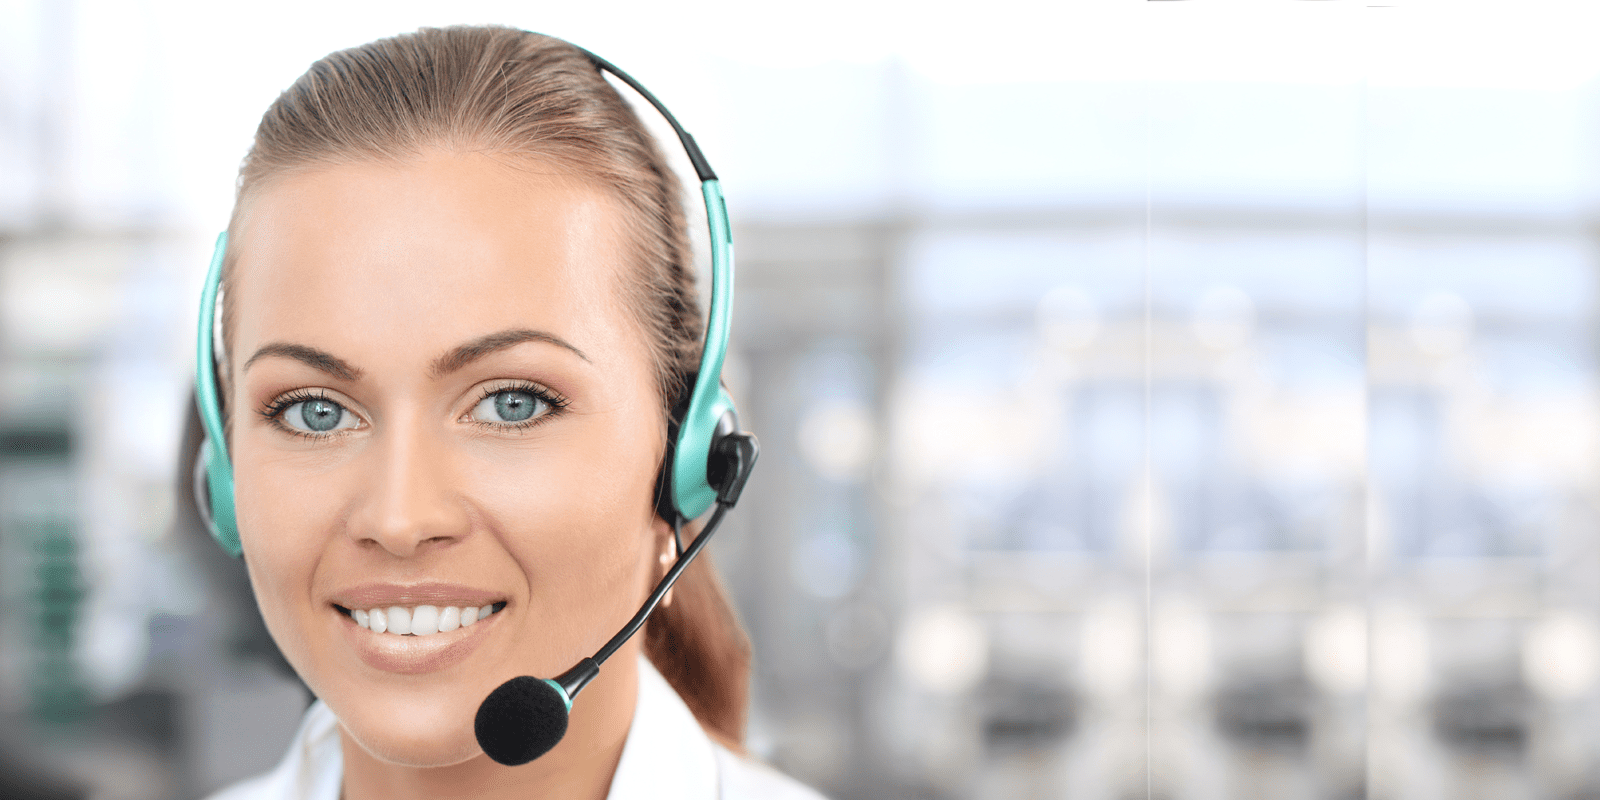 Call Center agent taking calls on her business headset.